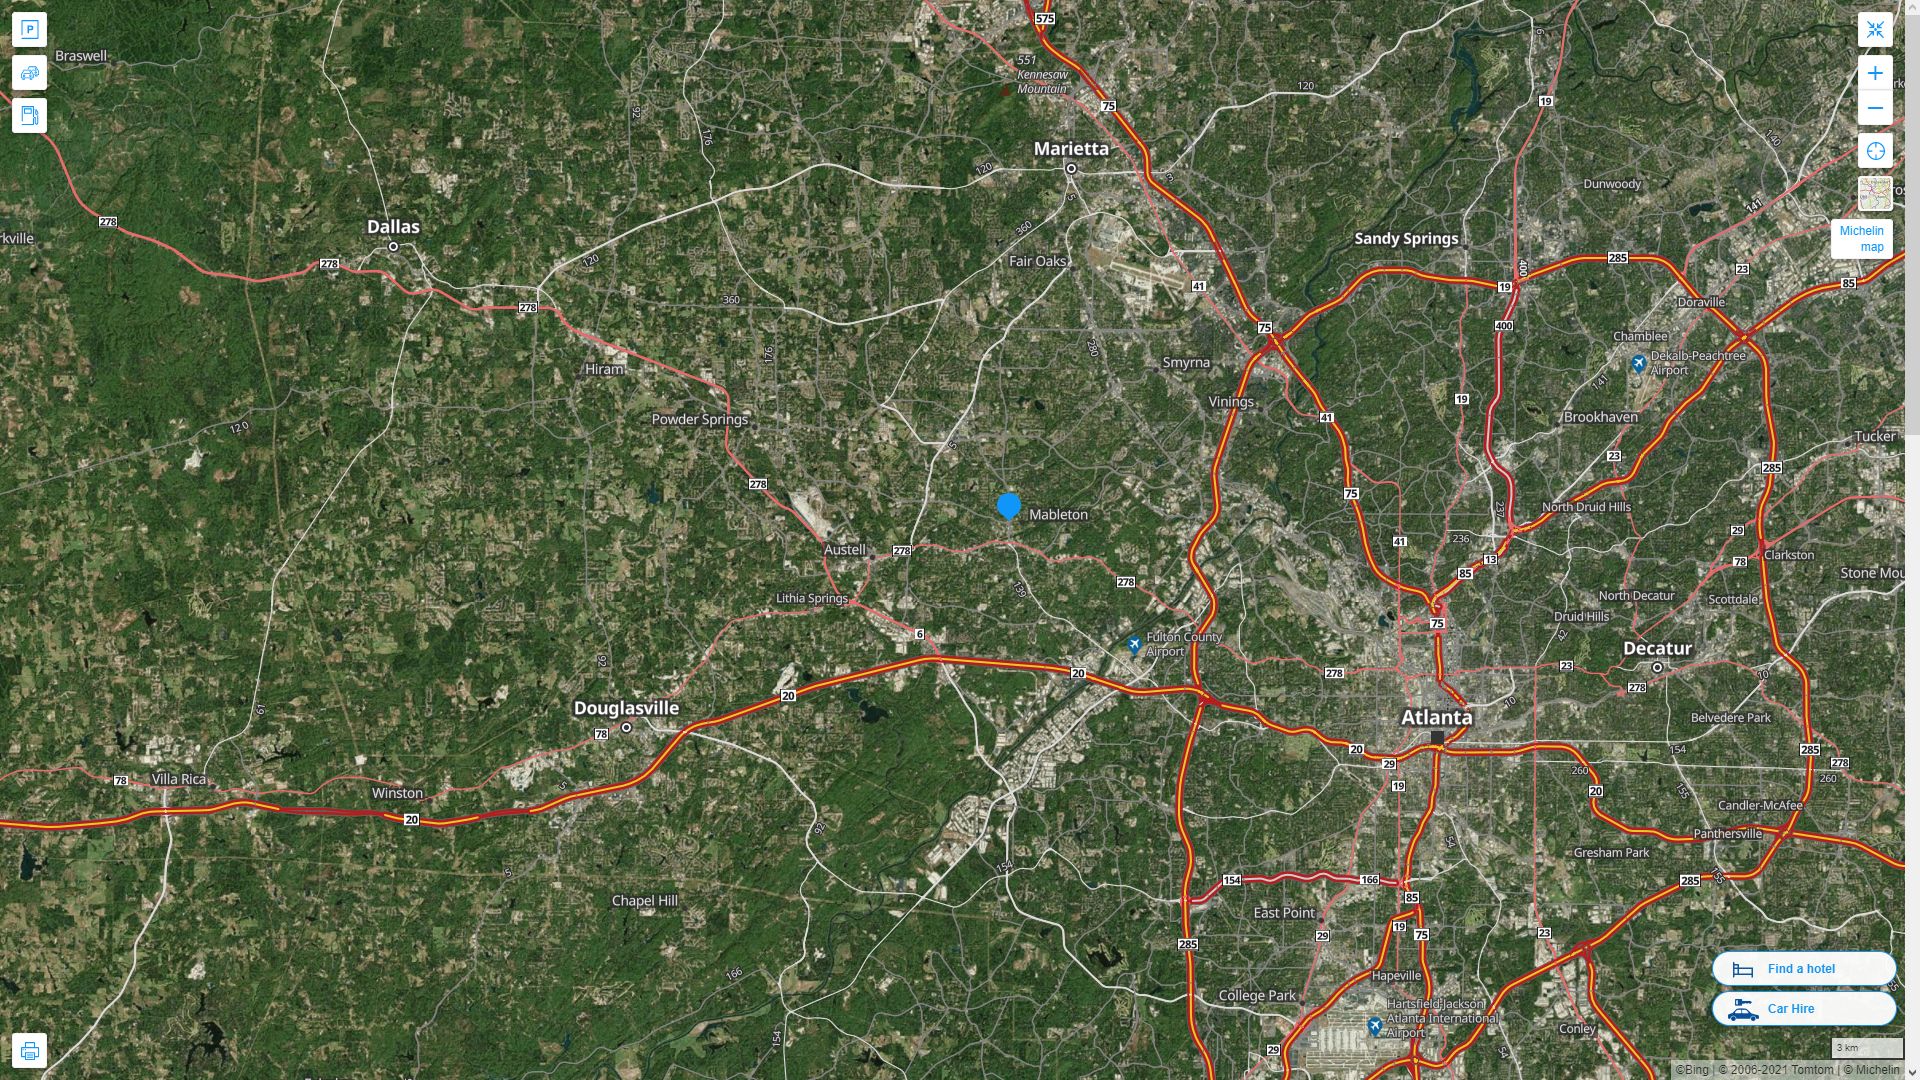 Mableton Georgia Highway and Road Map with Satellite View